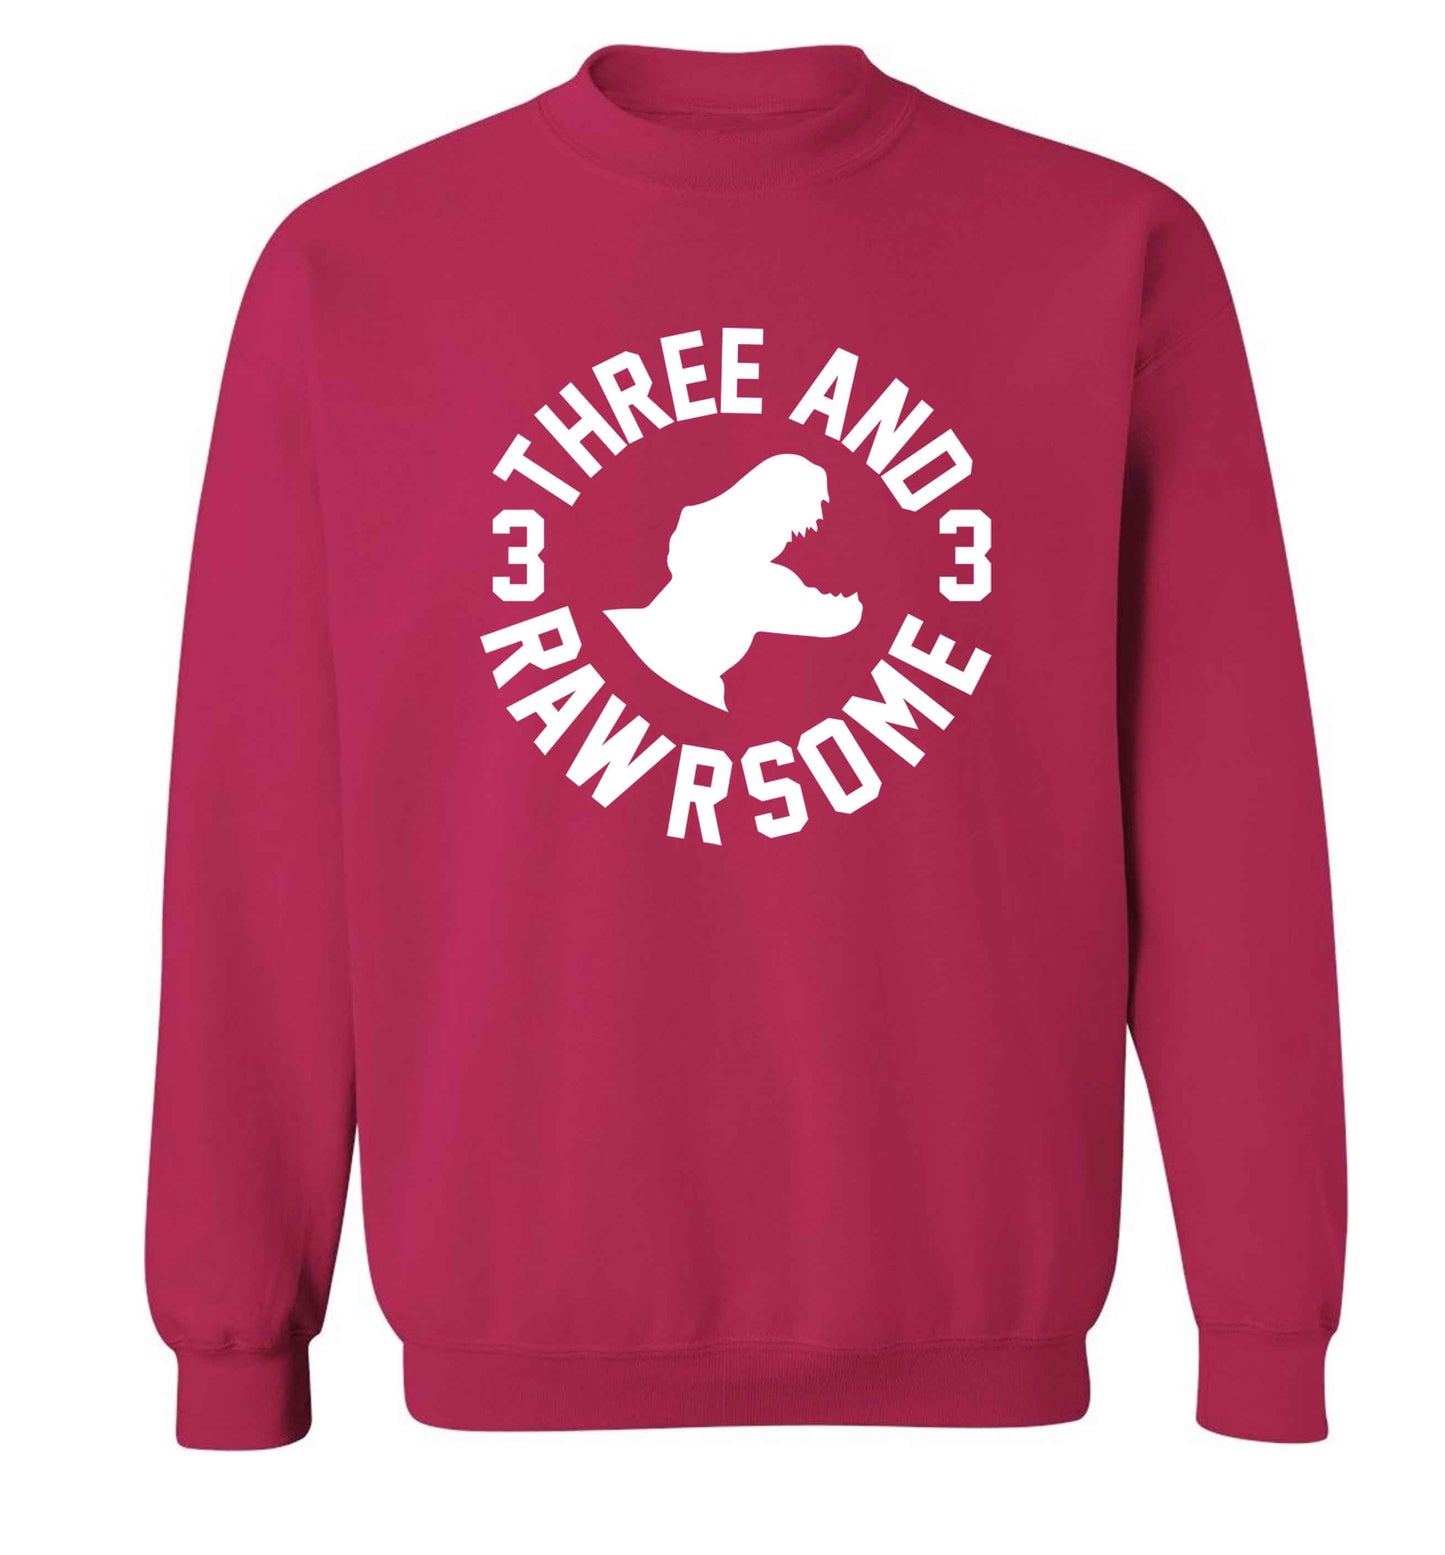 Three and rawrsome adult's unisex pink sweater 2XL